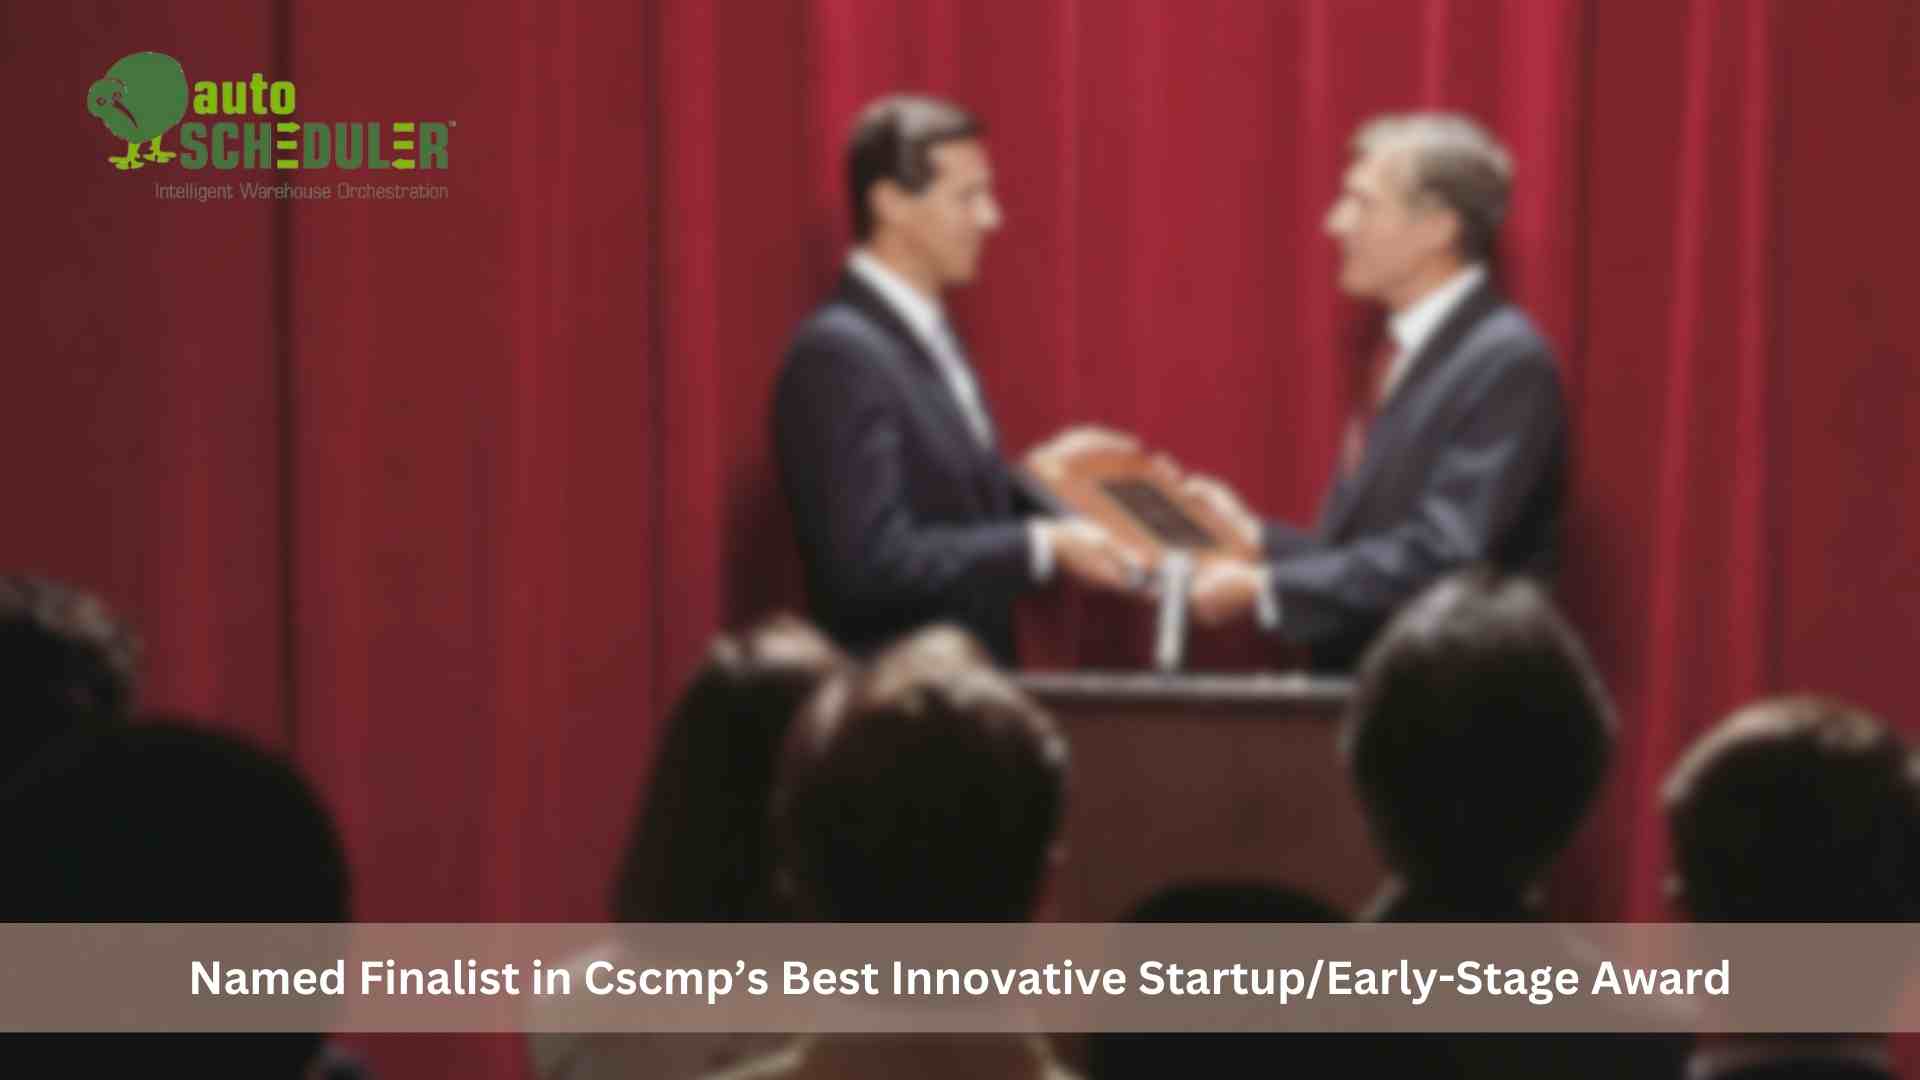 AutoScheduler Named Finalist in CSCMP’s Best Innovative Startup/Early-Stage Award